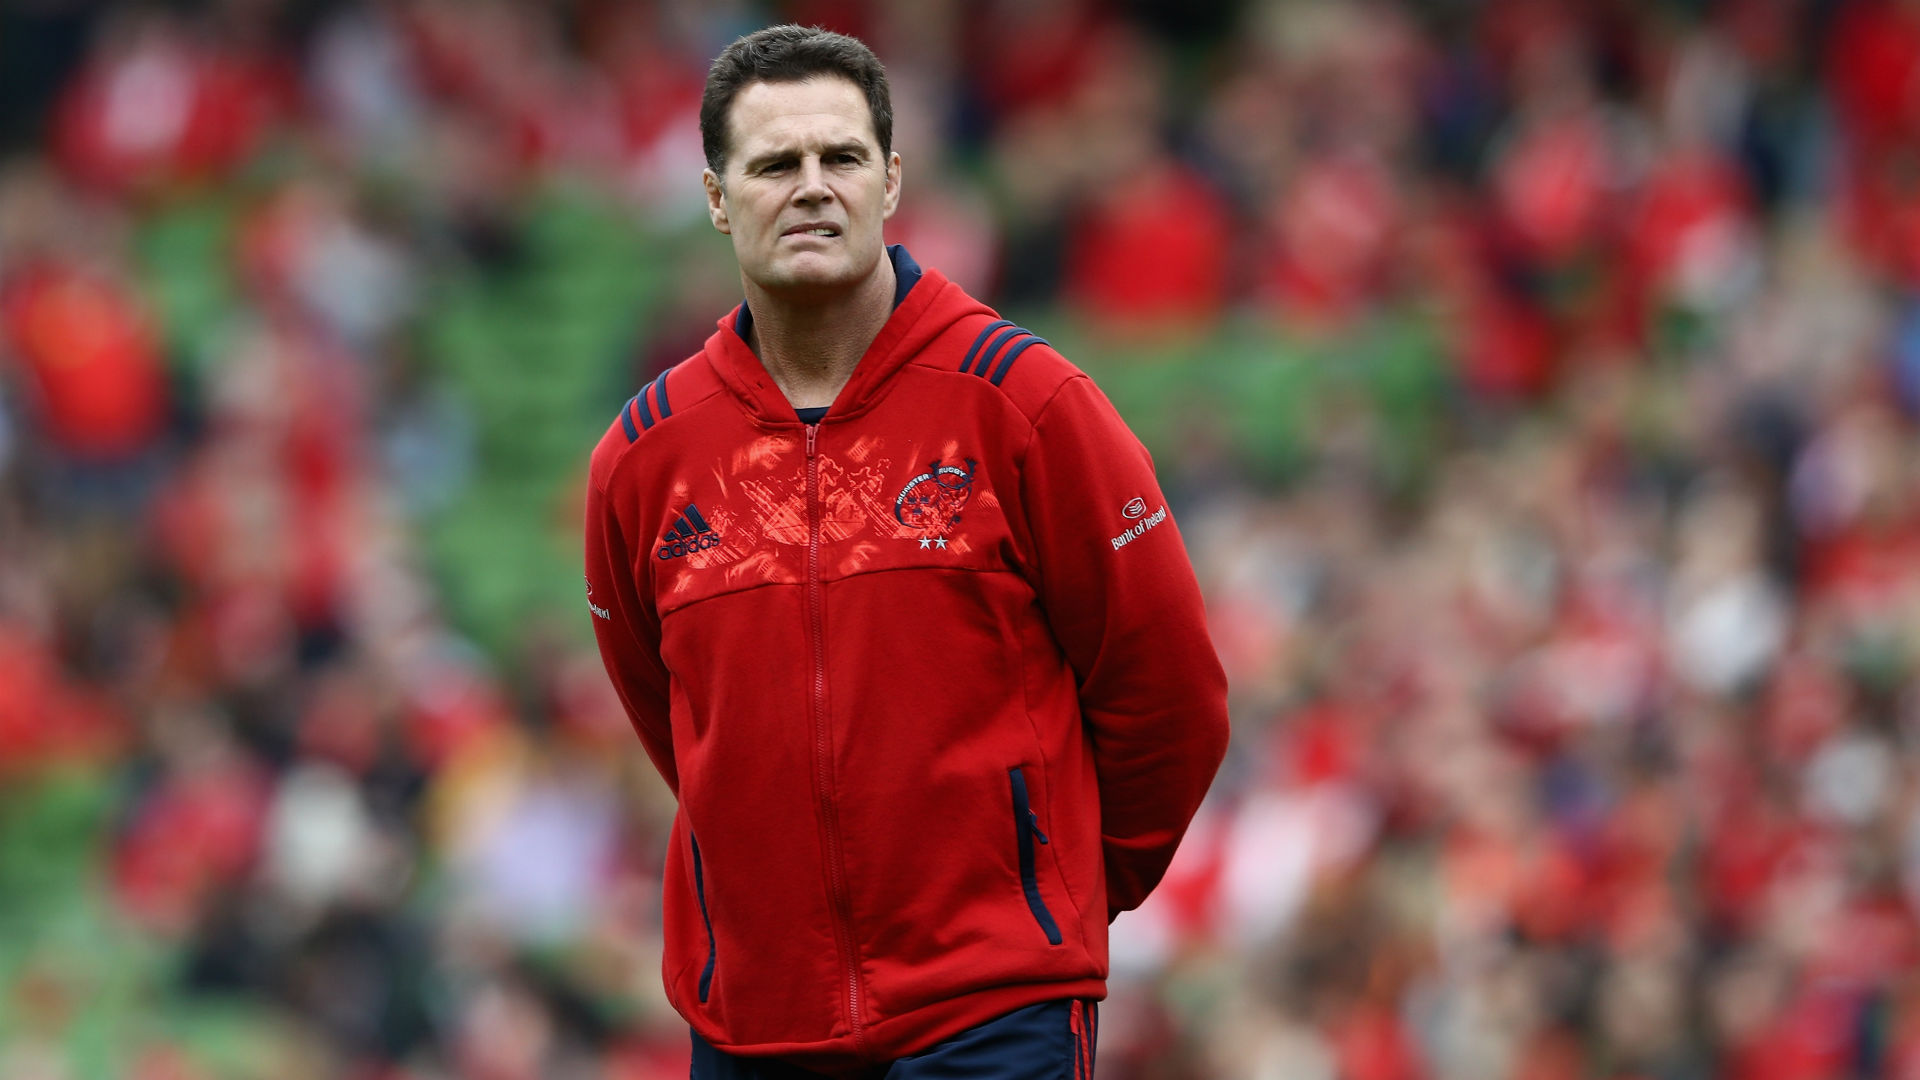 Former Springbok Rassie Erasmus is the man to replace Allister Coetzee, who was sacked this month.